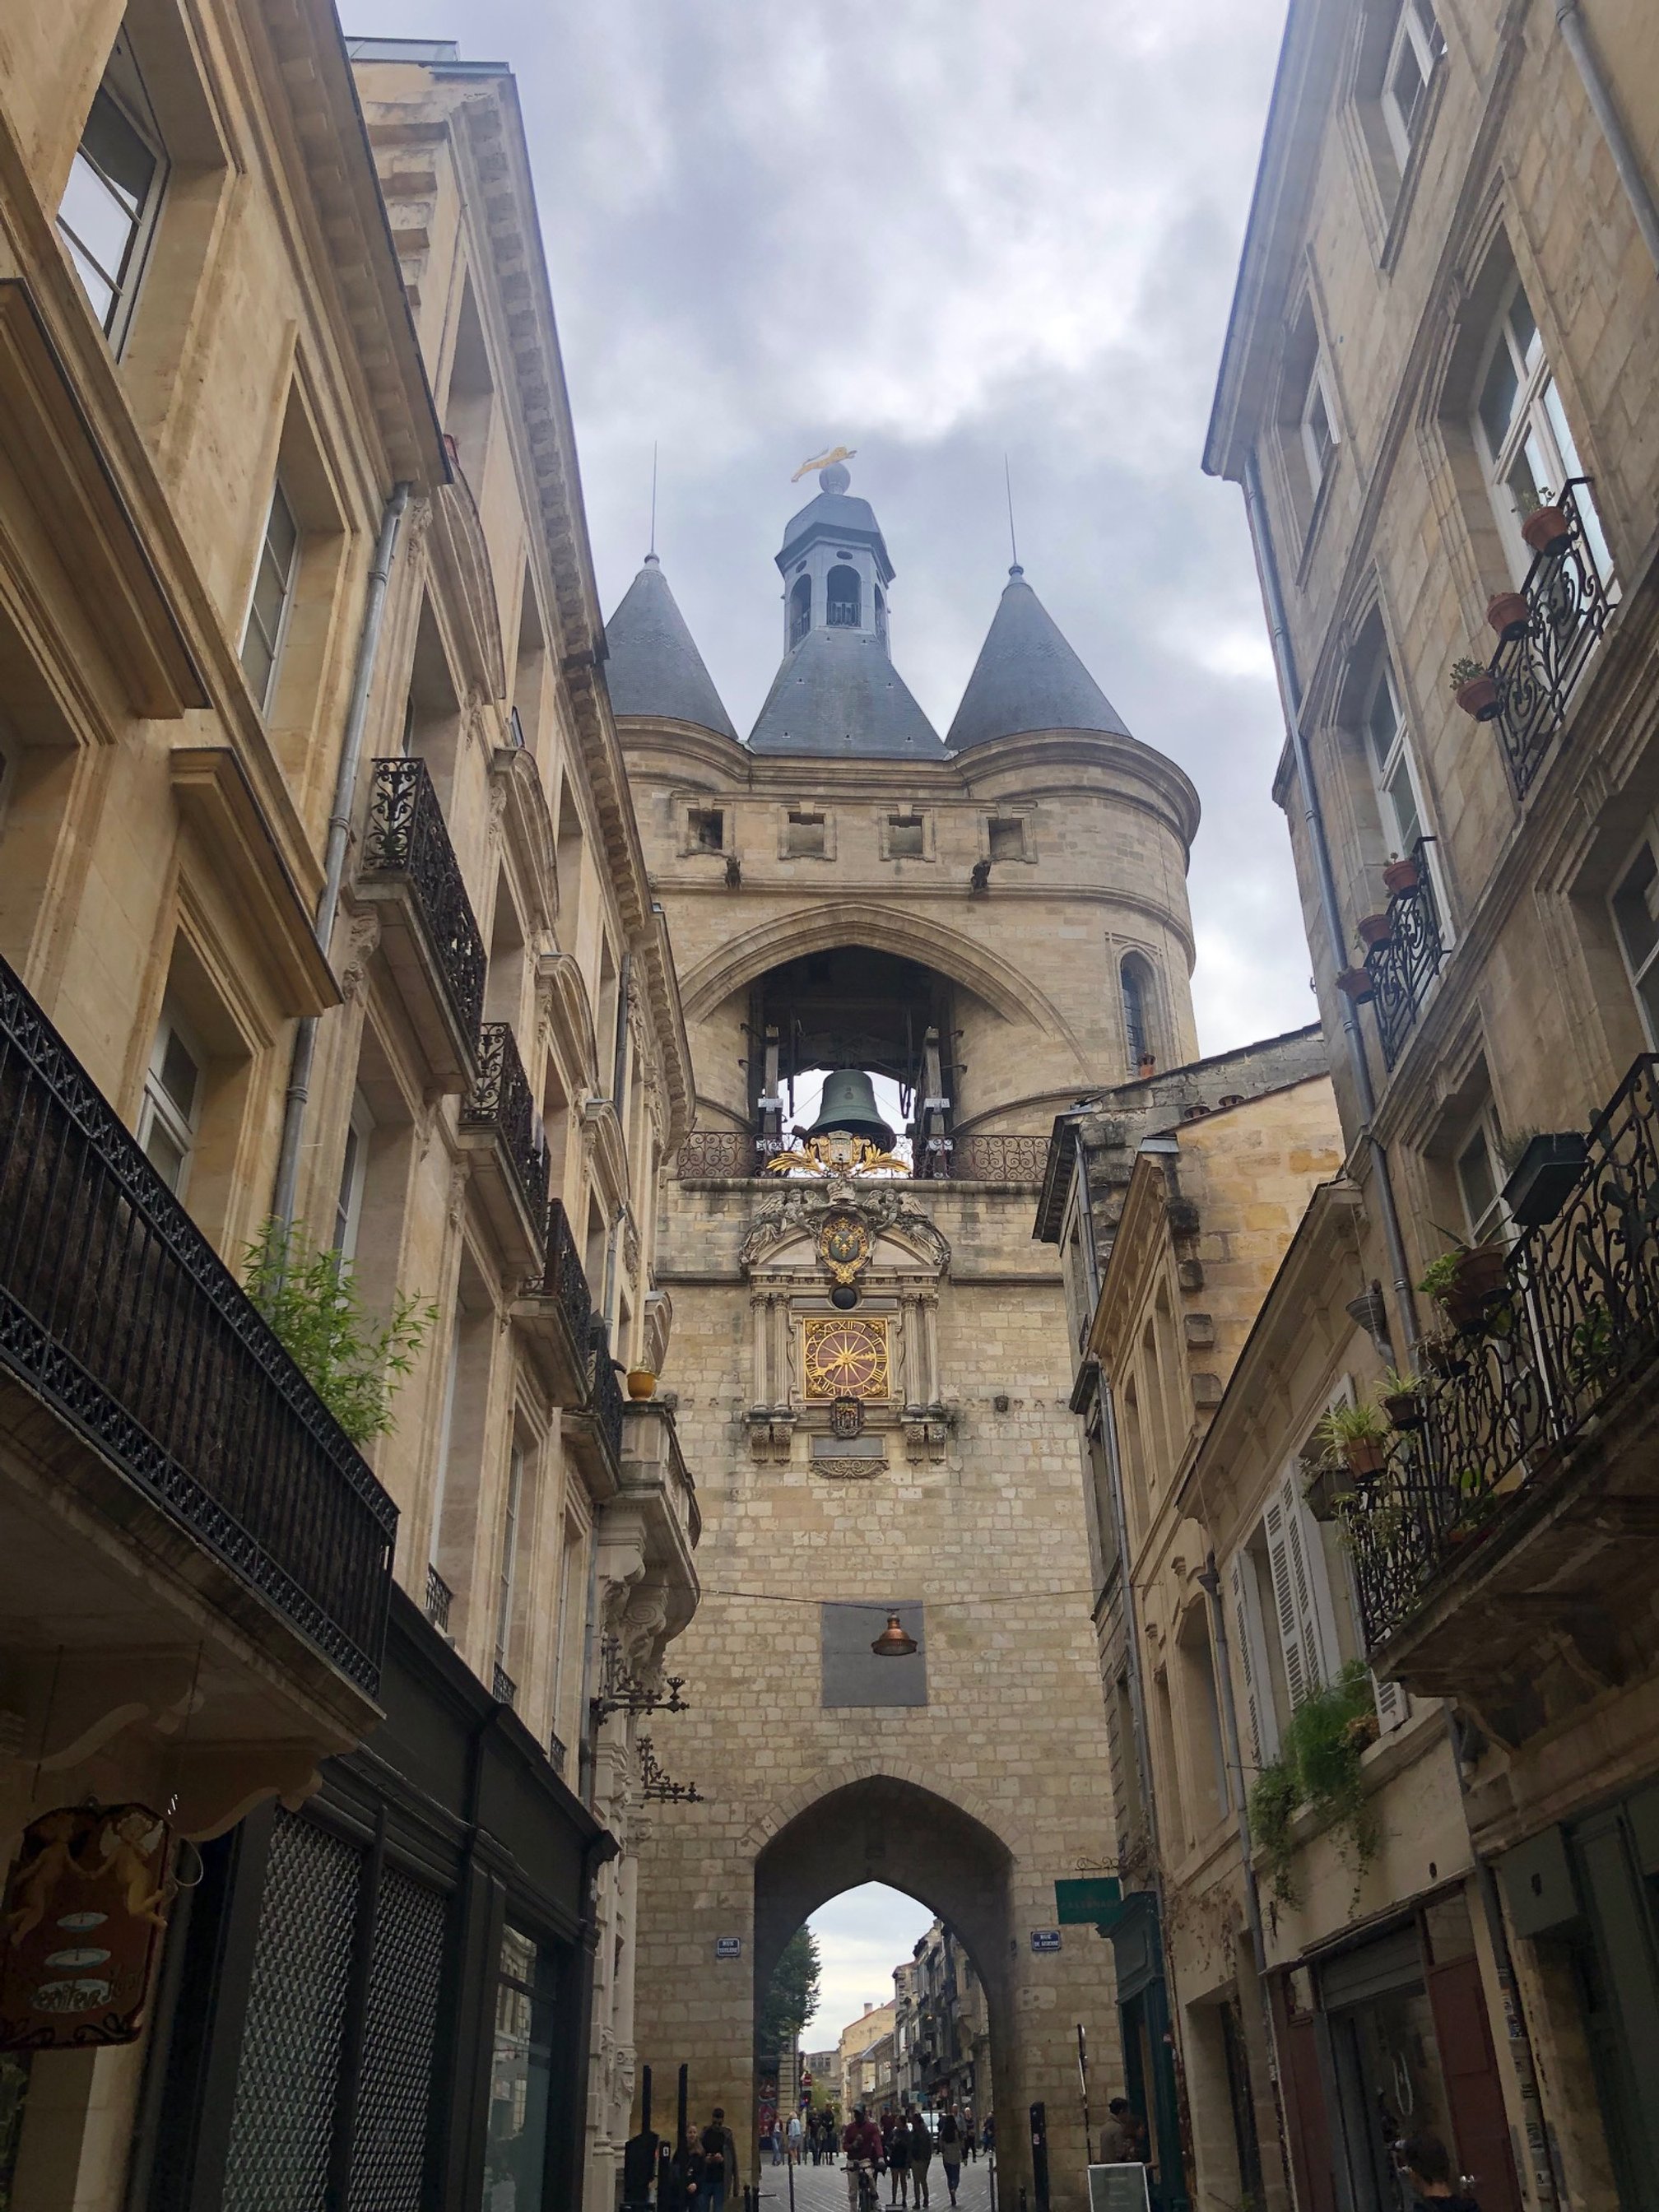  The Grosse Cloche is one of the oldest belfries in France. The bell was cast in 1775 and weighs no less than 7,750 kilos! The gateway where the bell is hung also had a defensive function and served as a prison. 